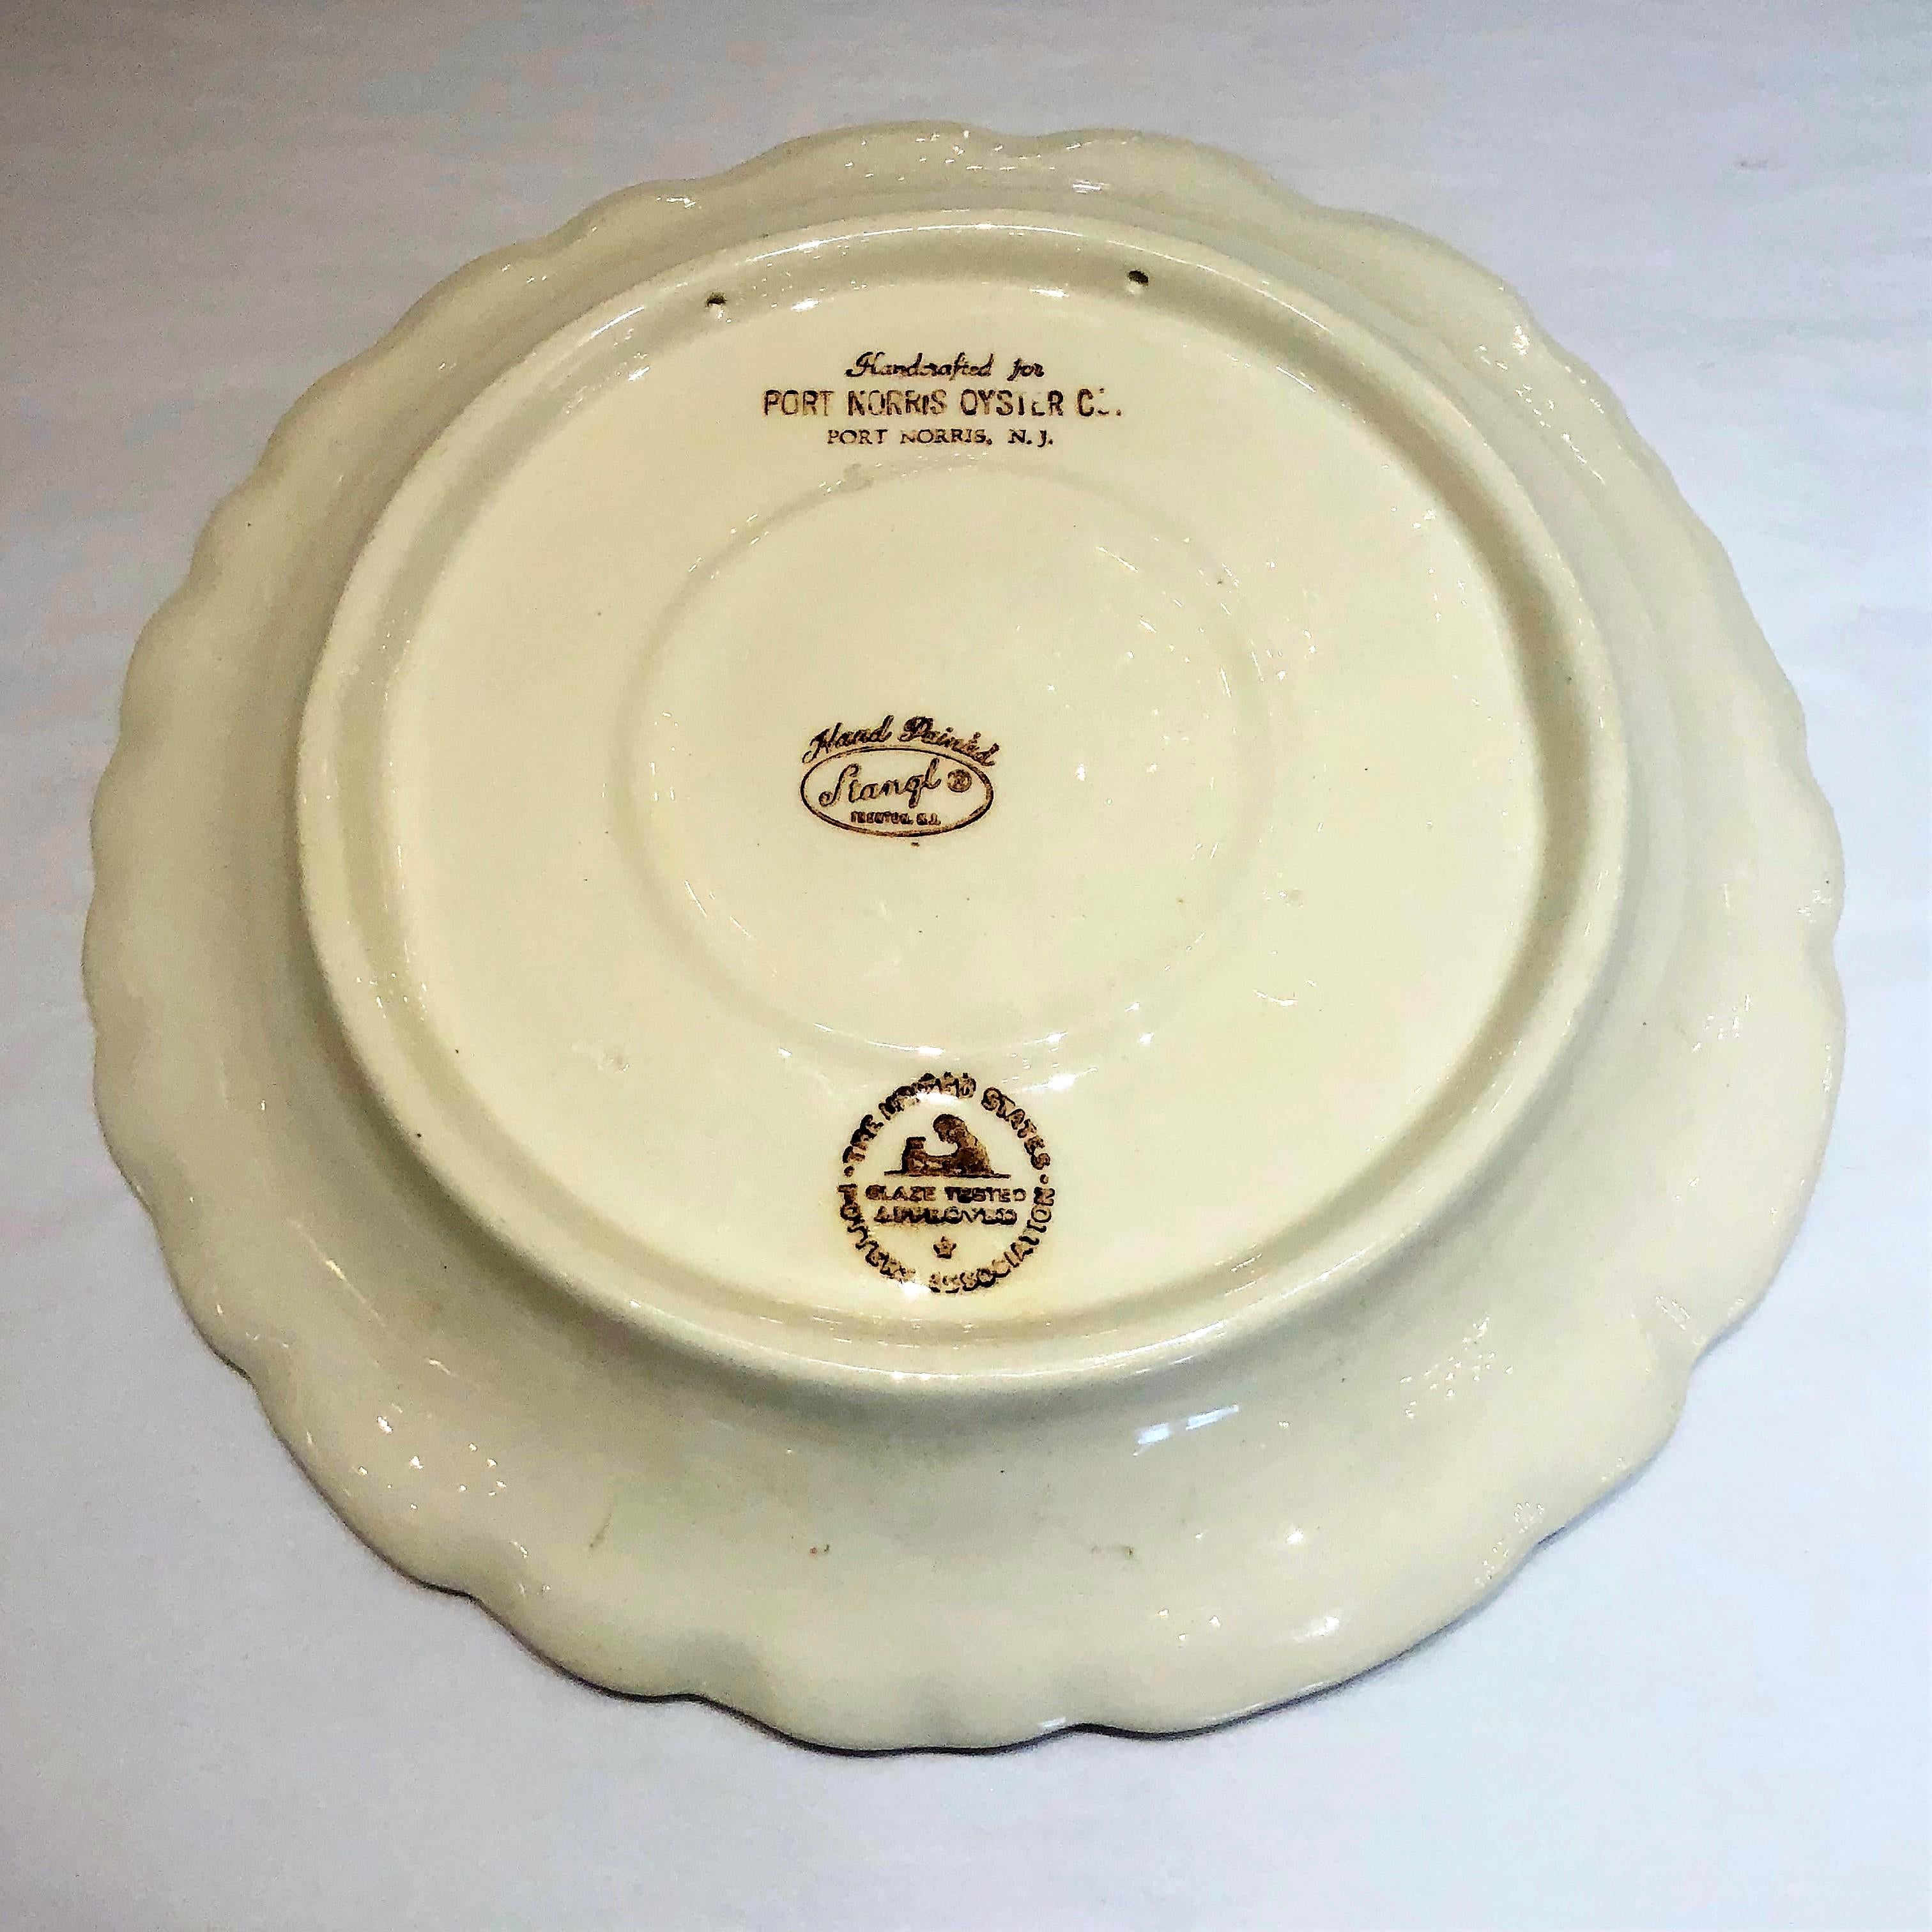 Estate midcentury American oyster plate made in a Turkey pattern by Stangl Pottery, New Jersey. Made for Port Norris Oyster Co.